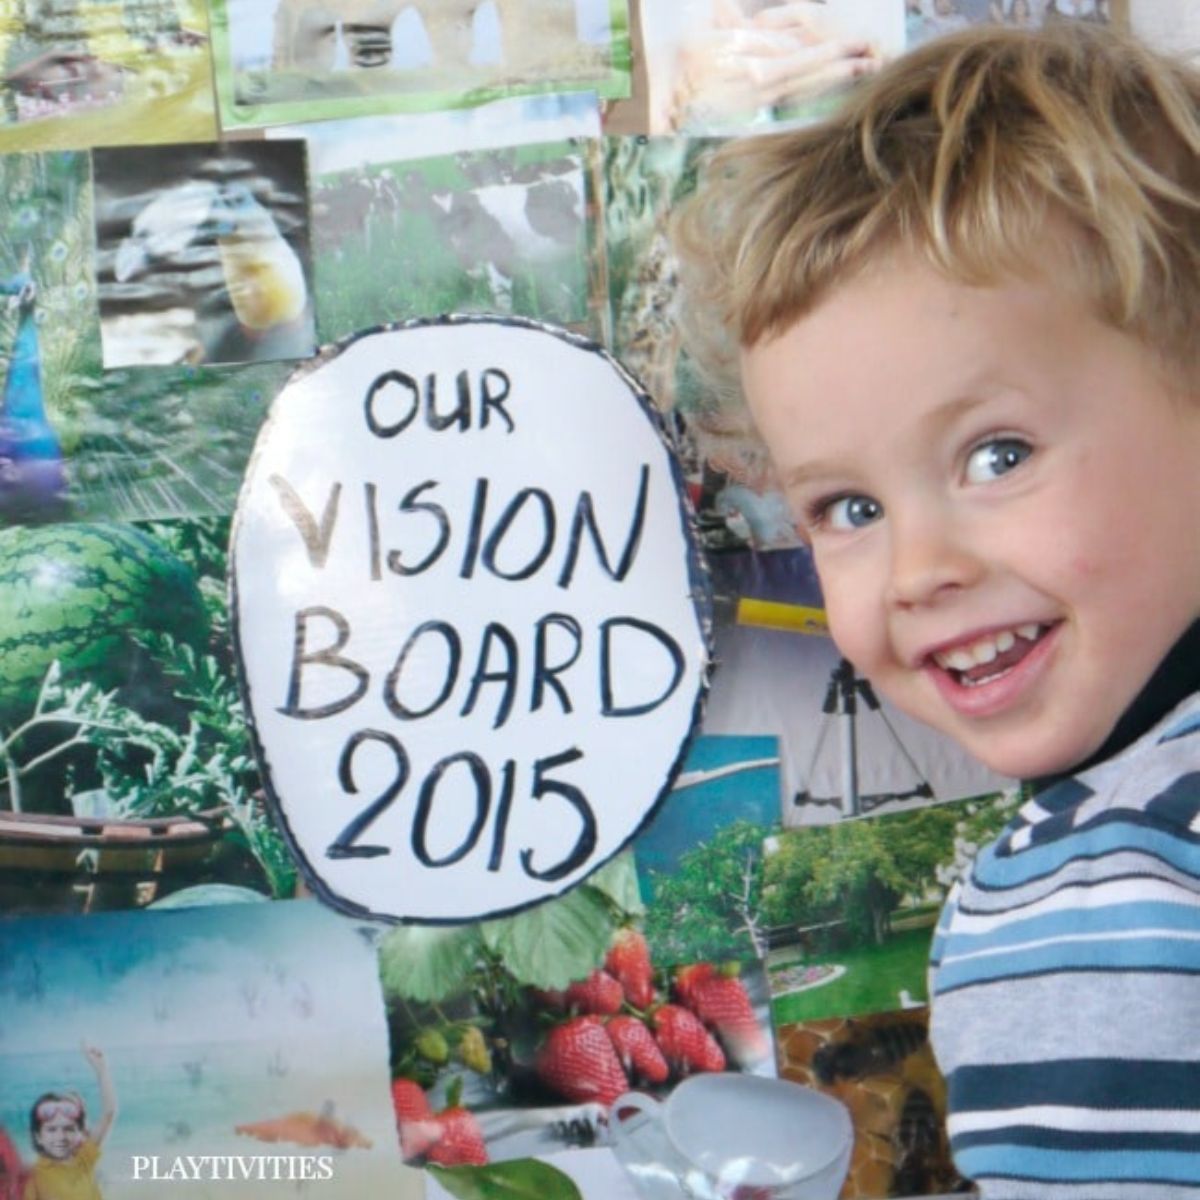 Smiling boy infront of vision board.